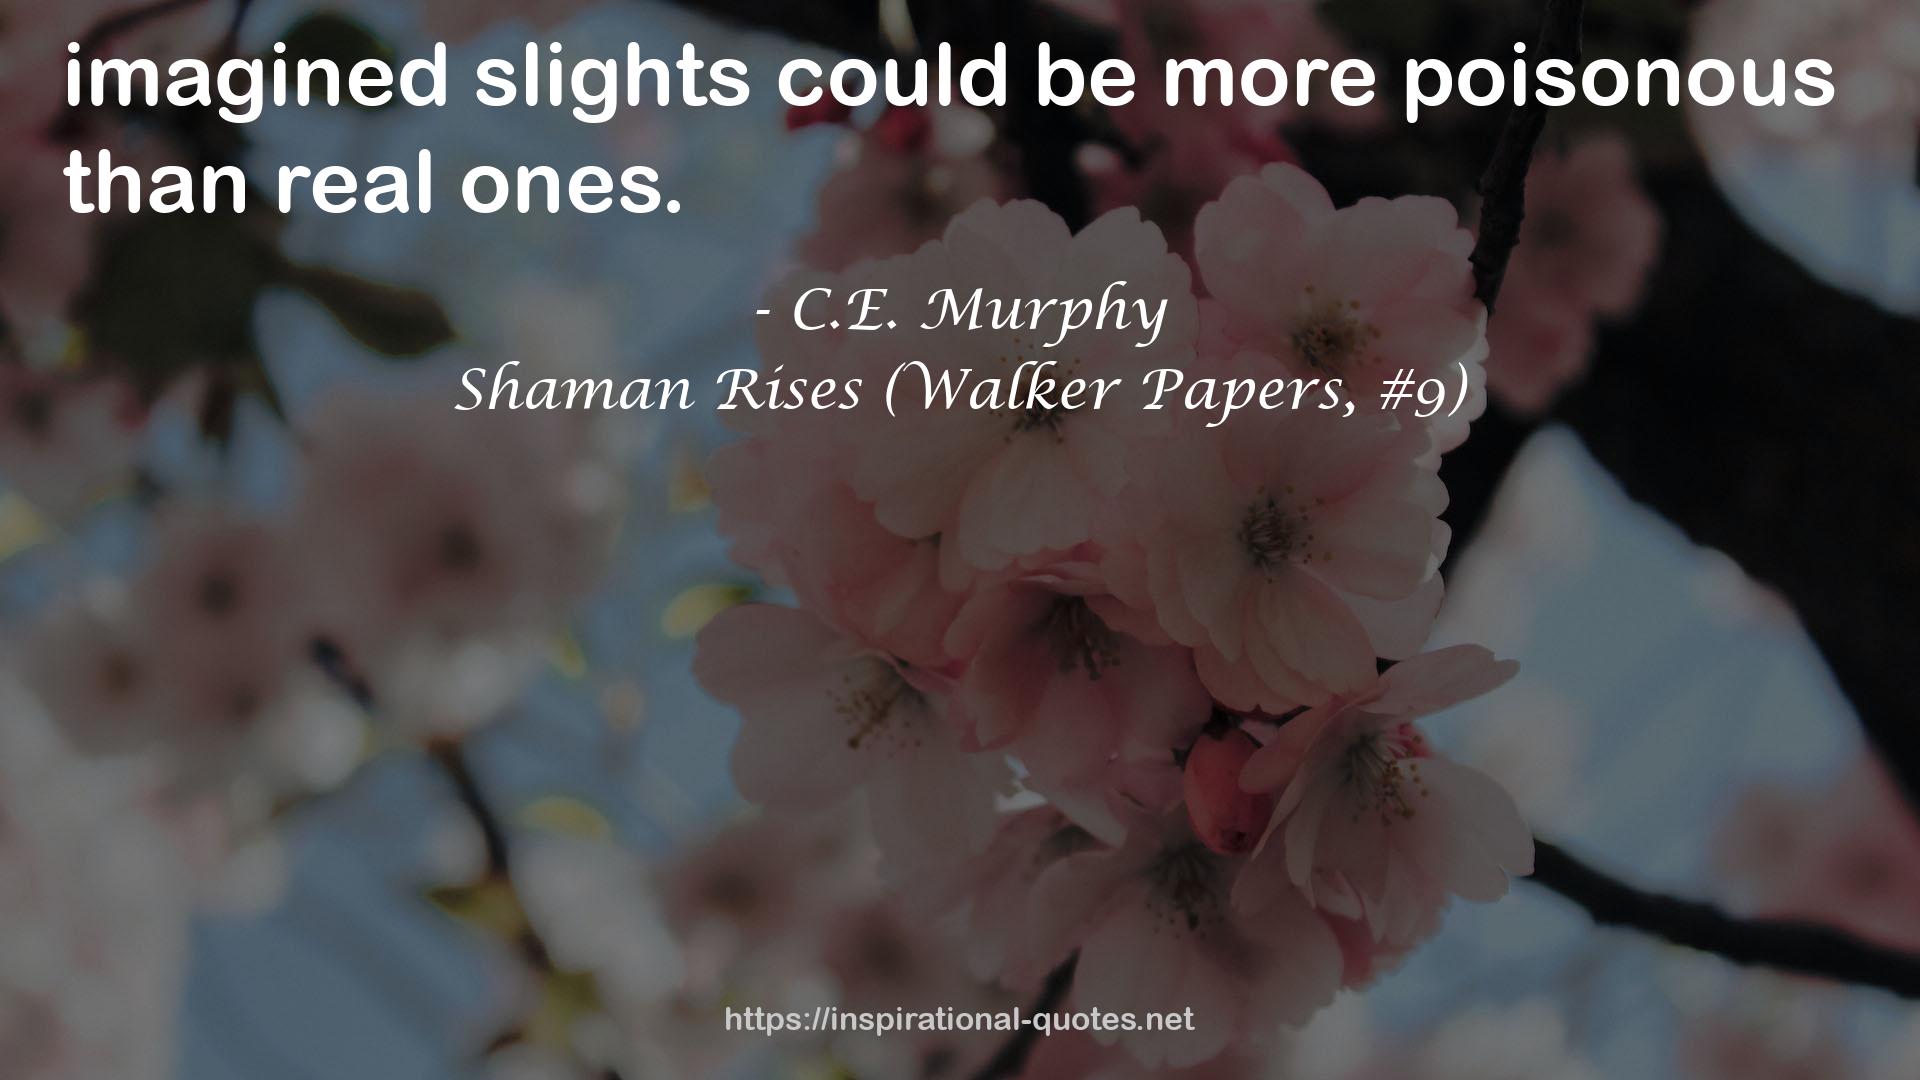 Shaman Rises (Walker Papers, #9) QUOTES